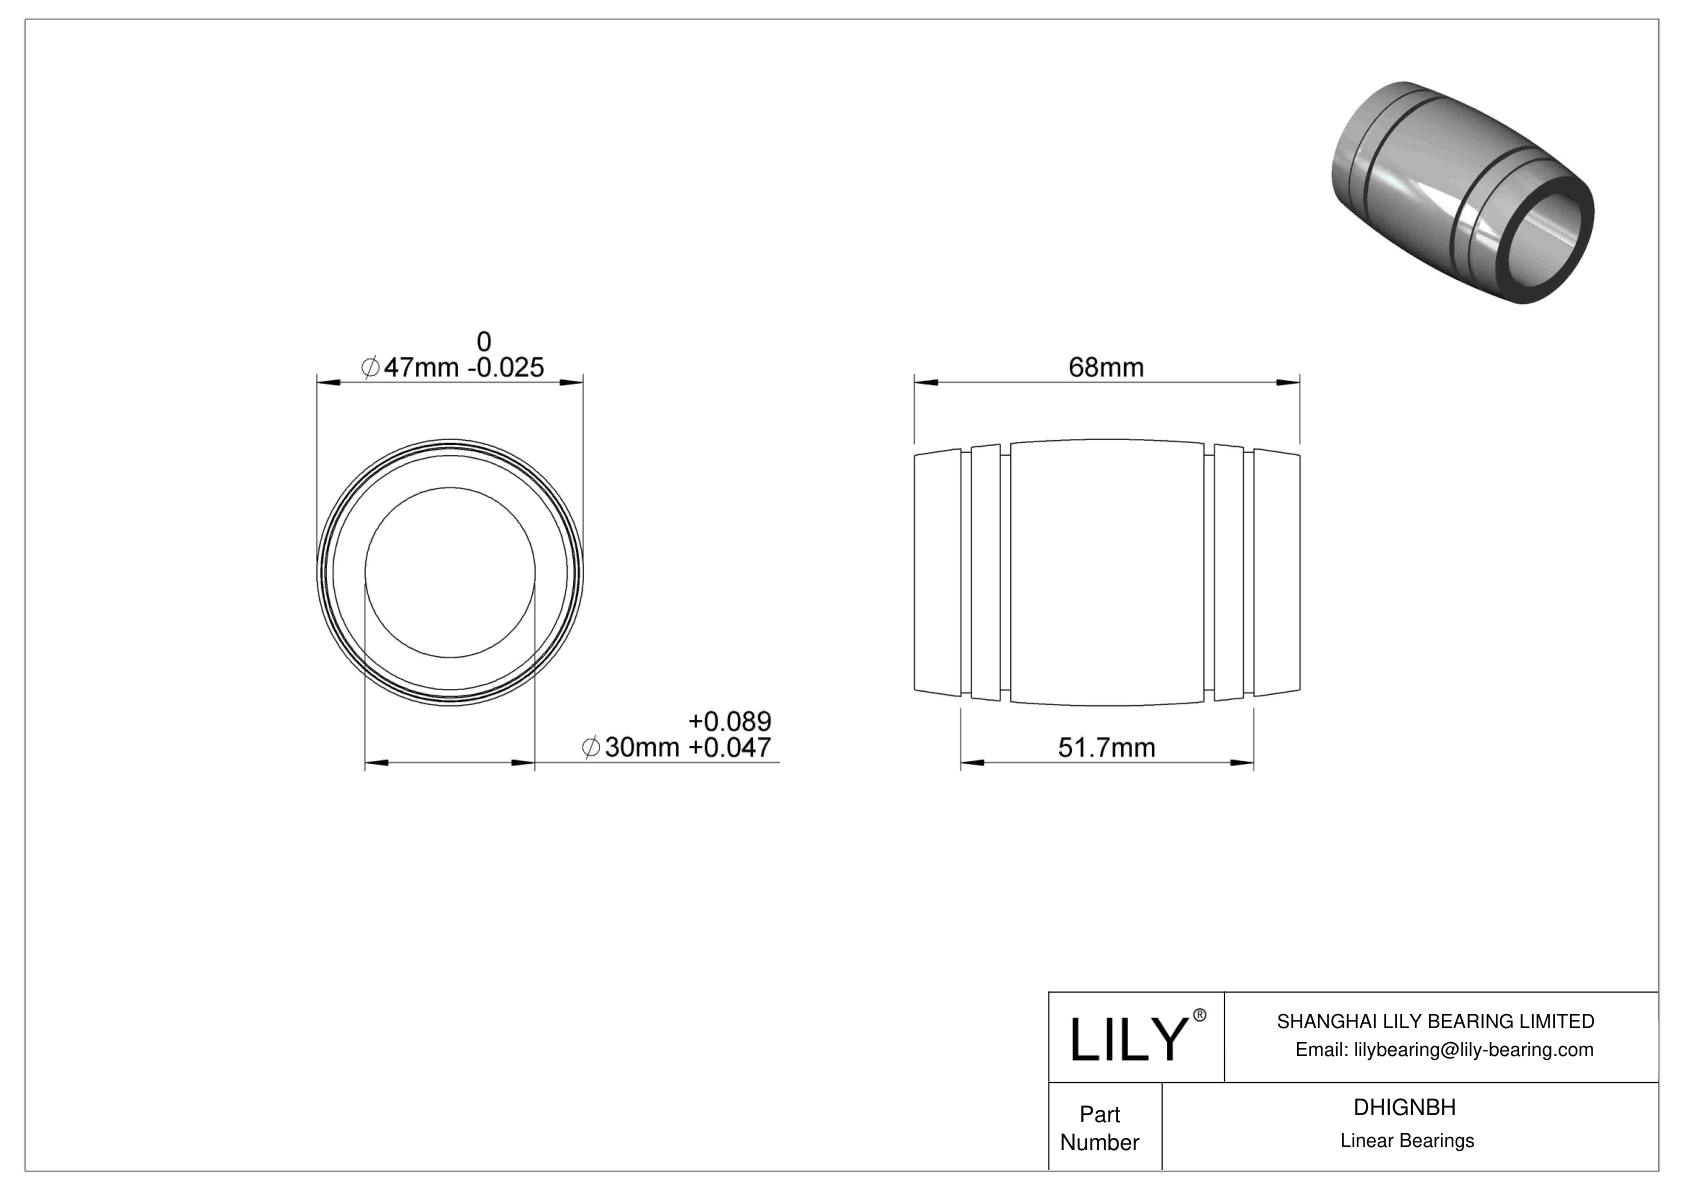 DHIGNBH Common Linear Sleeve Bearings cad drawing